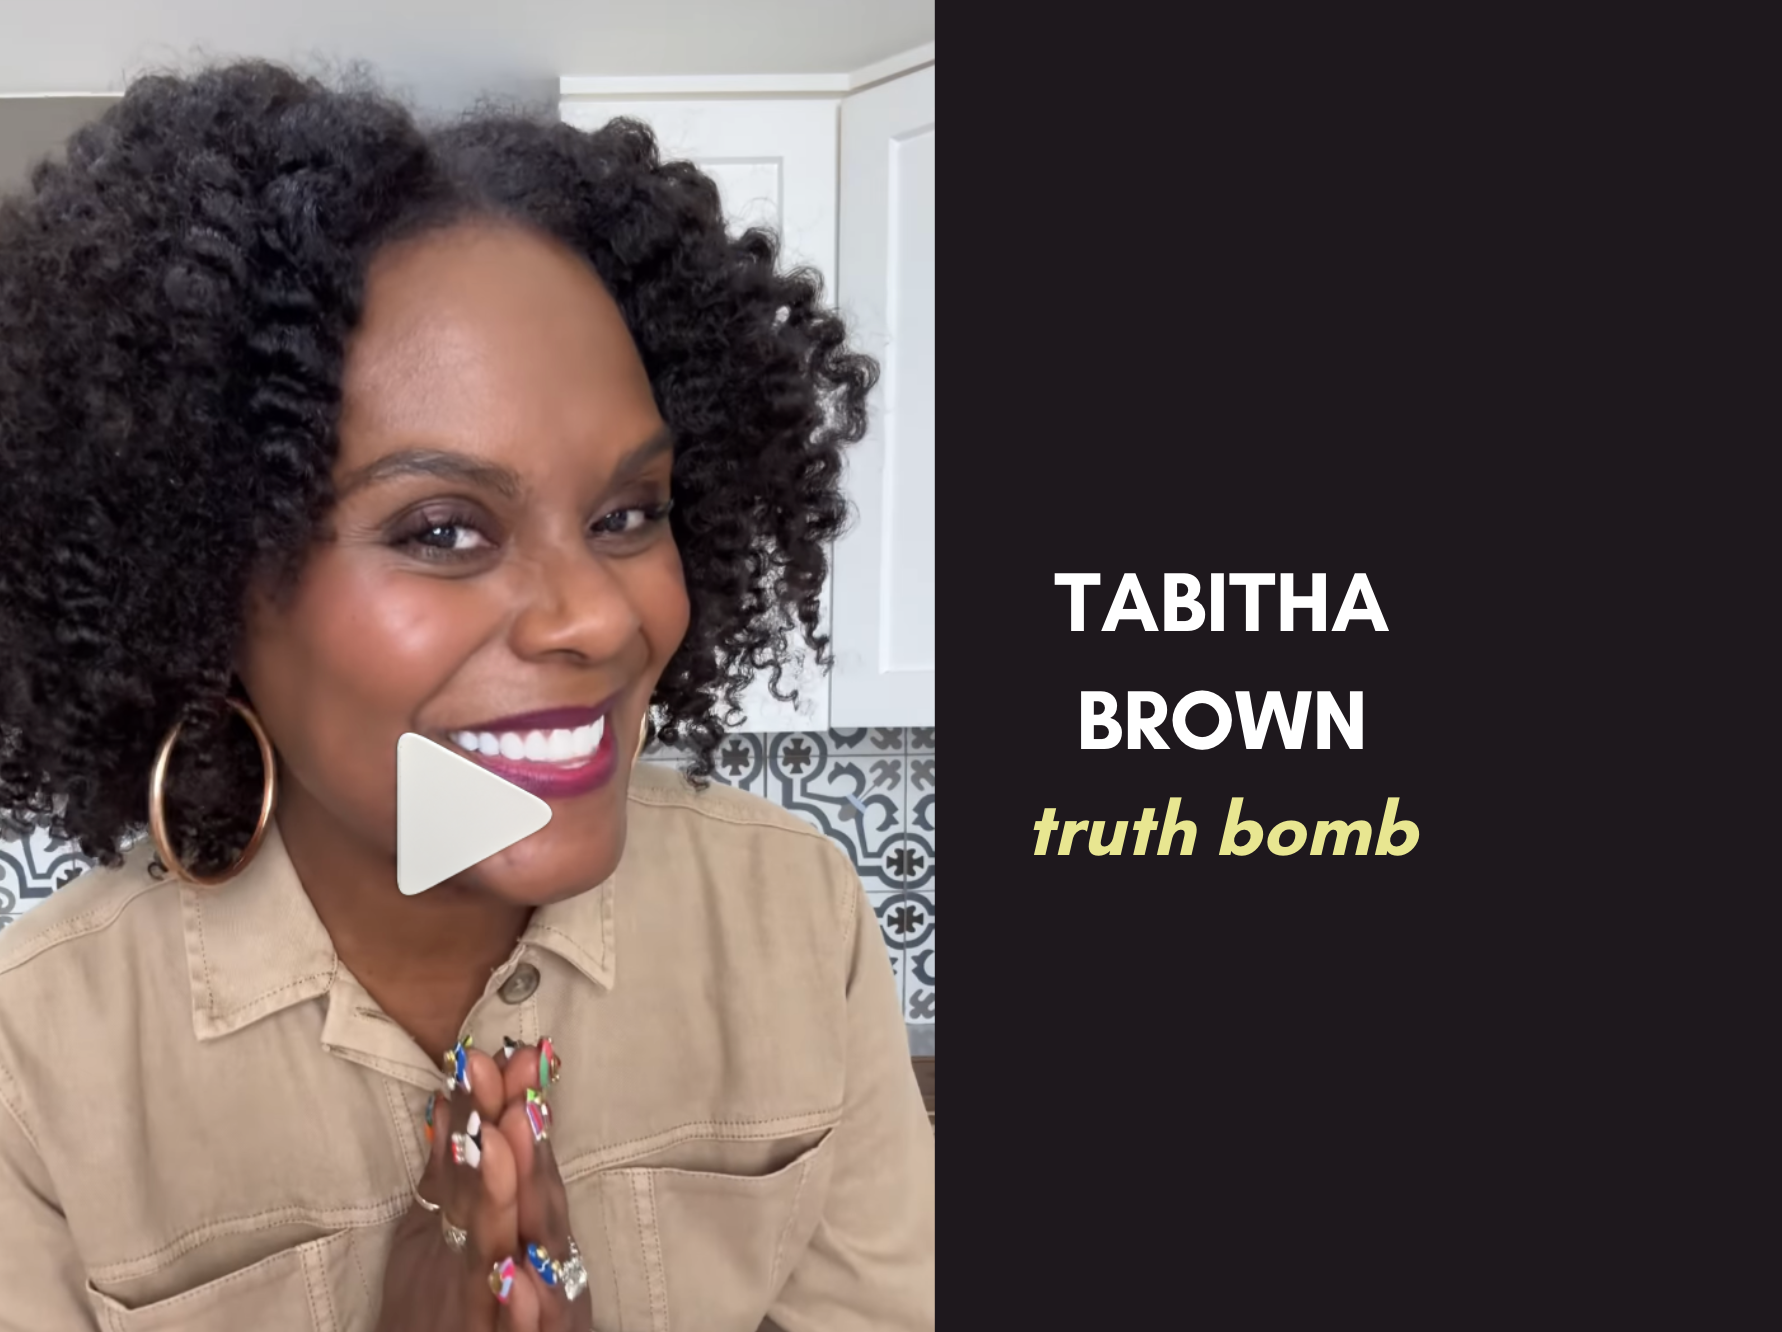 Best Tabitha Brown quote for entrepreneurs